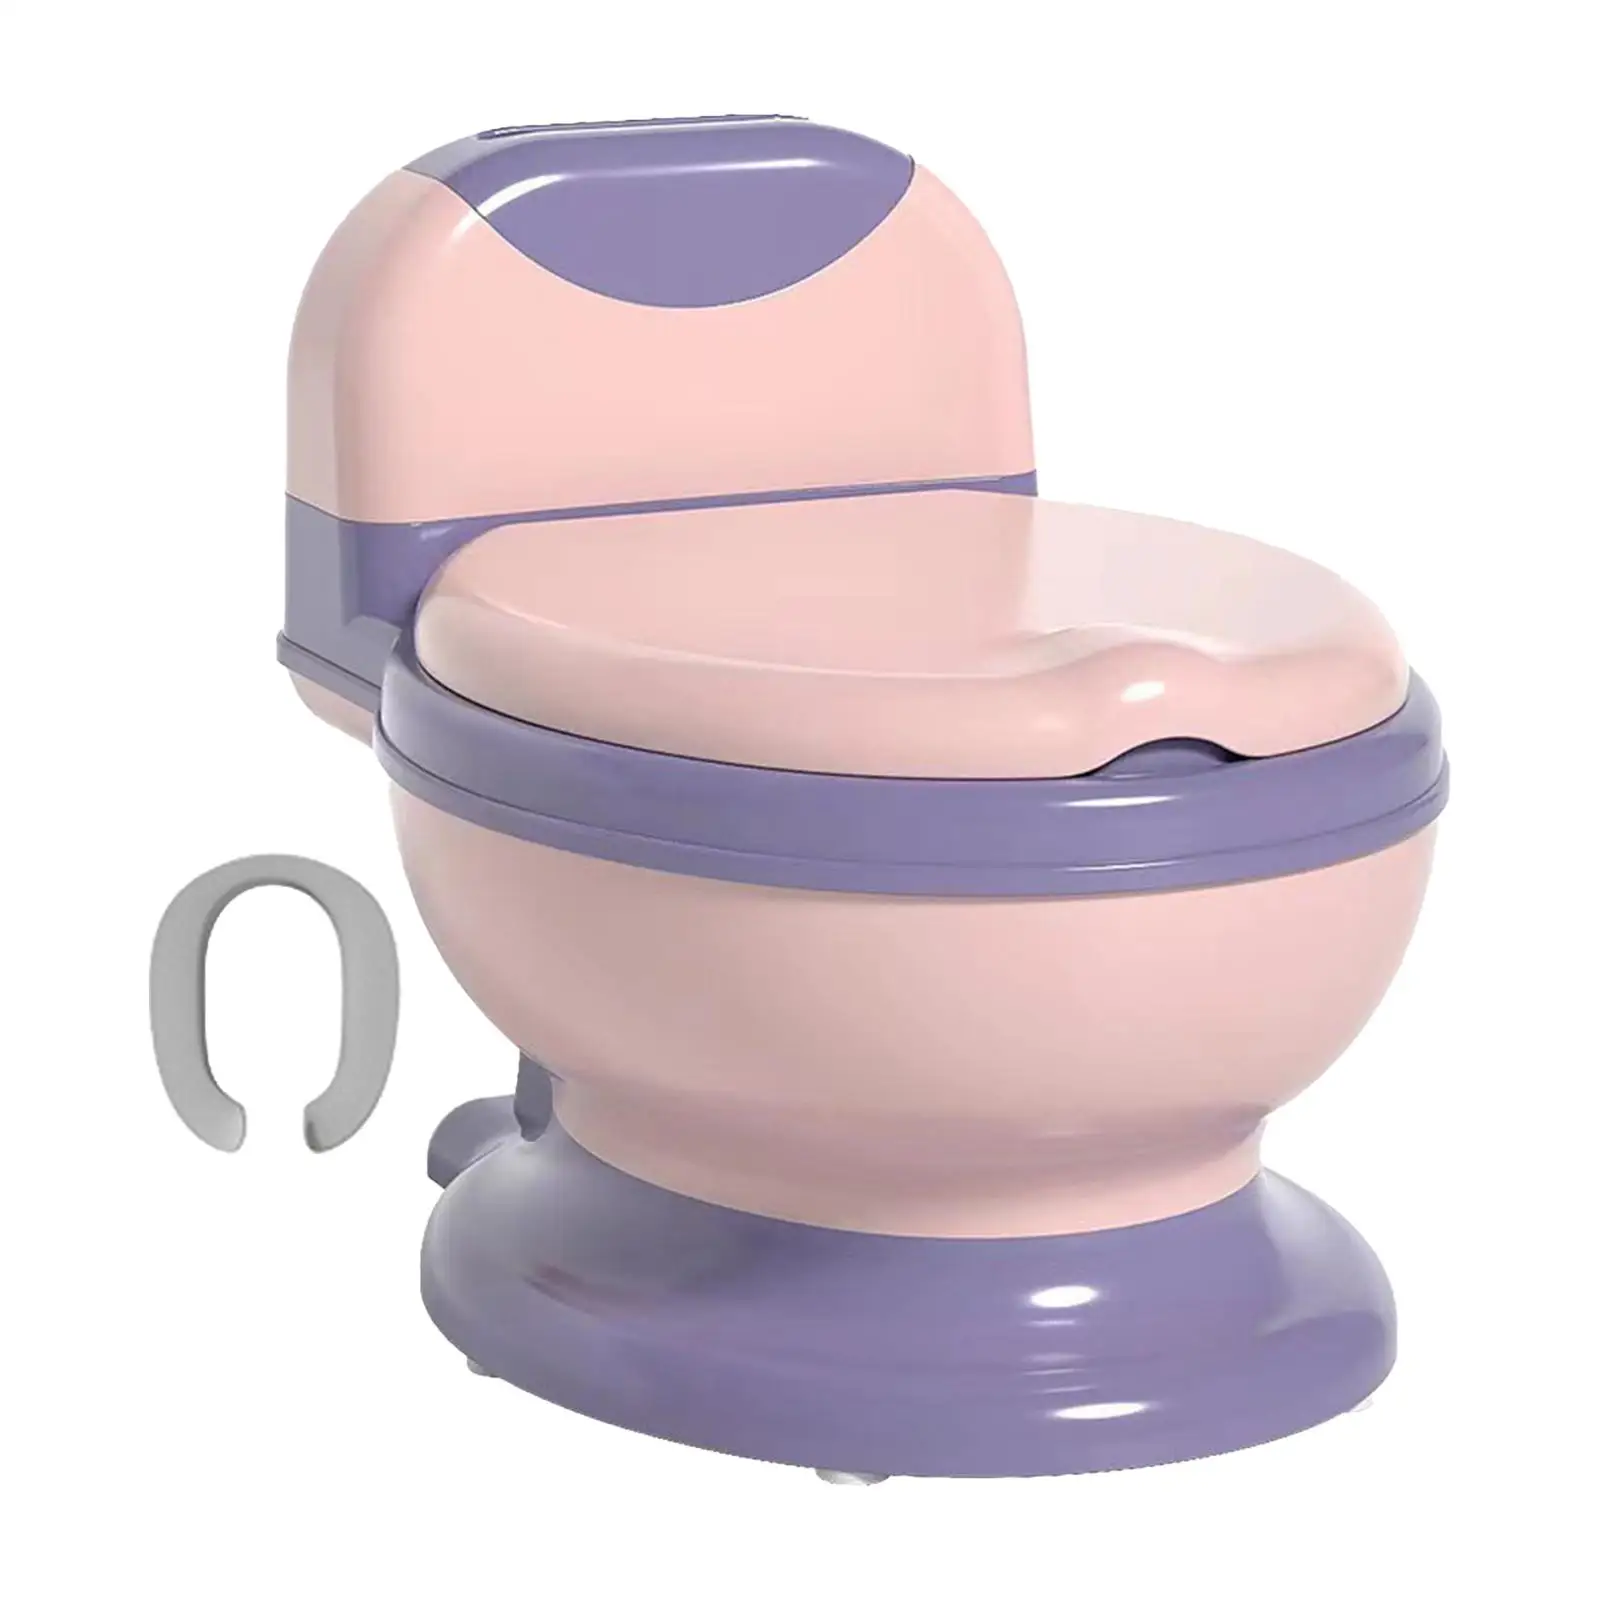 Potty Train Toilet Comfortable Portable Detachable Realistic Toilet Real Feel Potty for Boys Girls Kids Children Toddlers